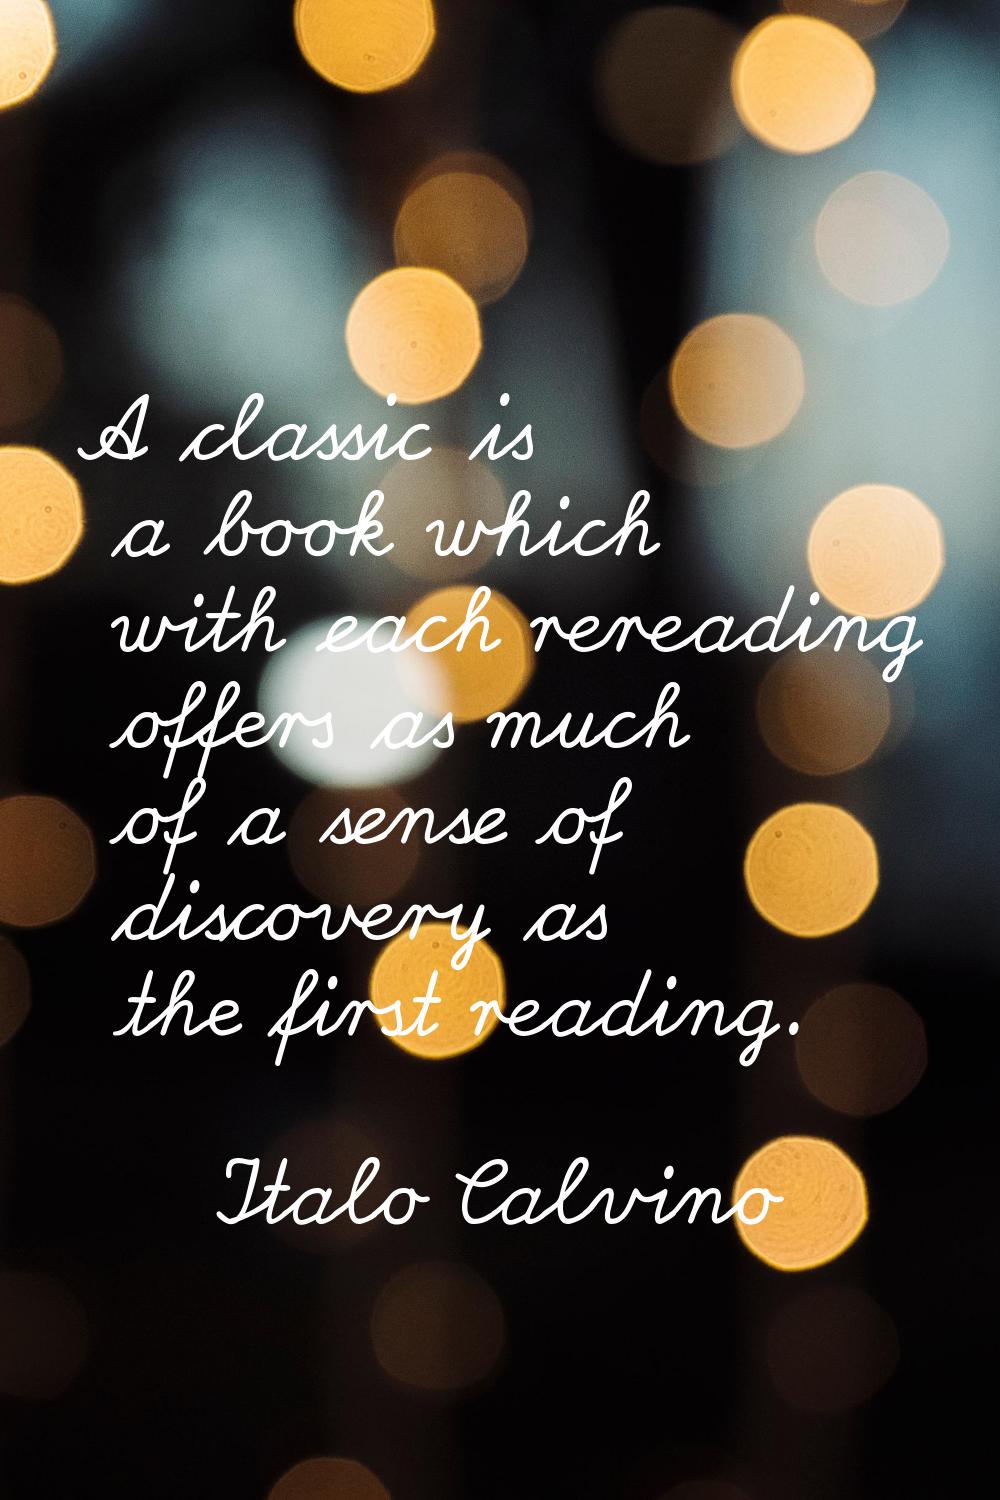 A classic is a book which with each rereading offers as much of a sense of discovery as the first r